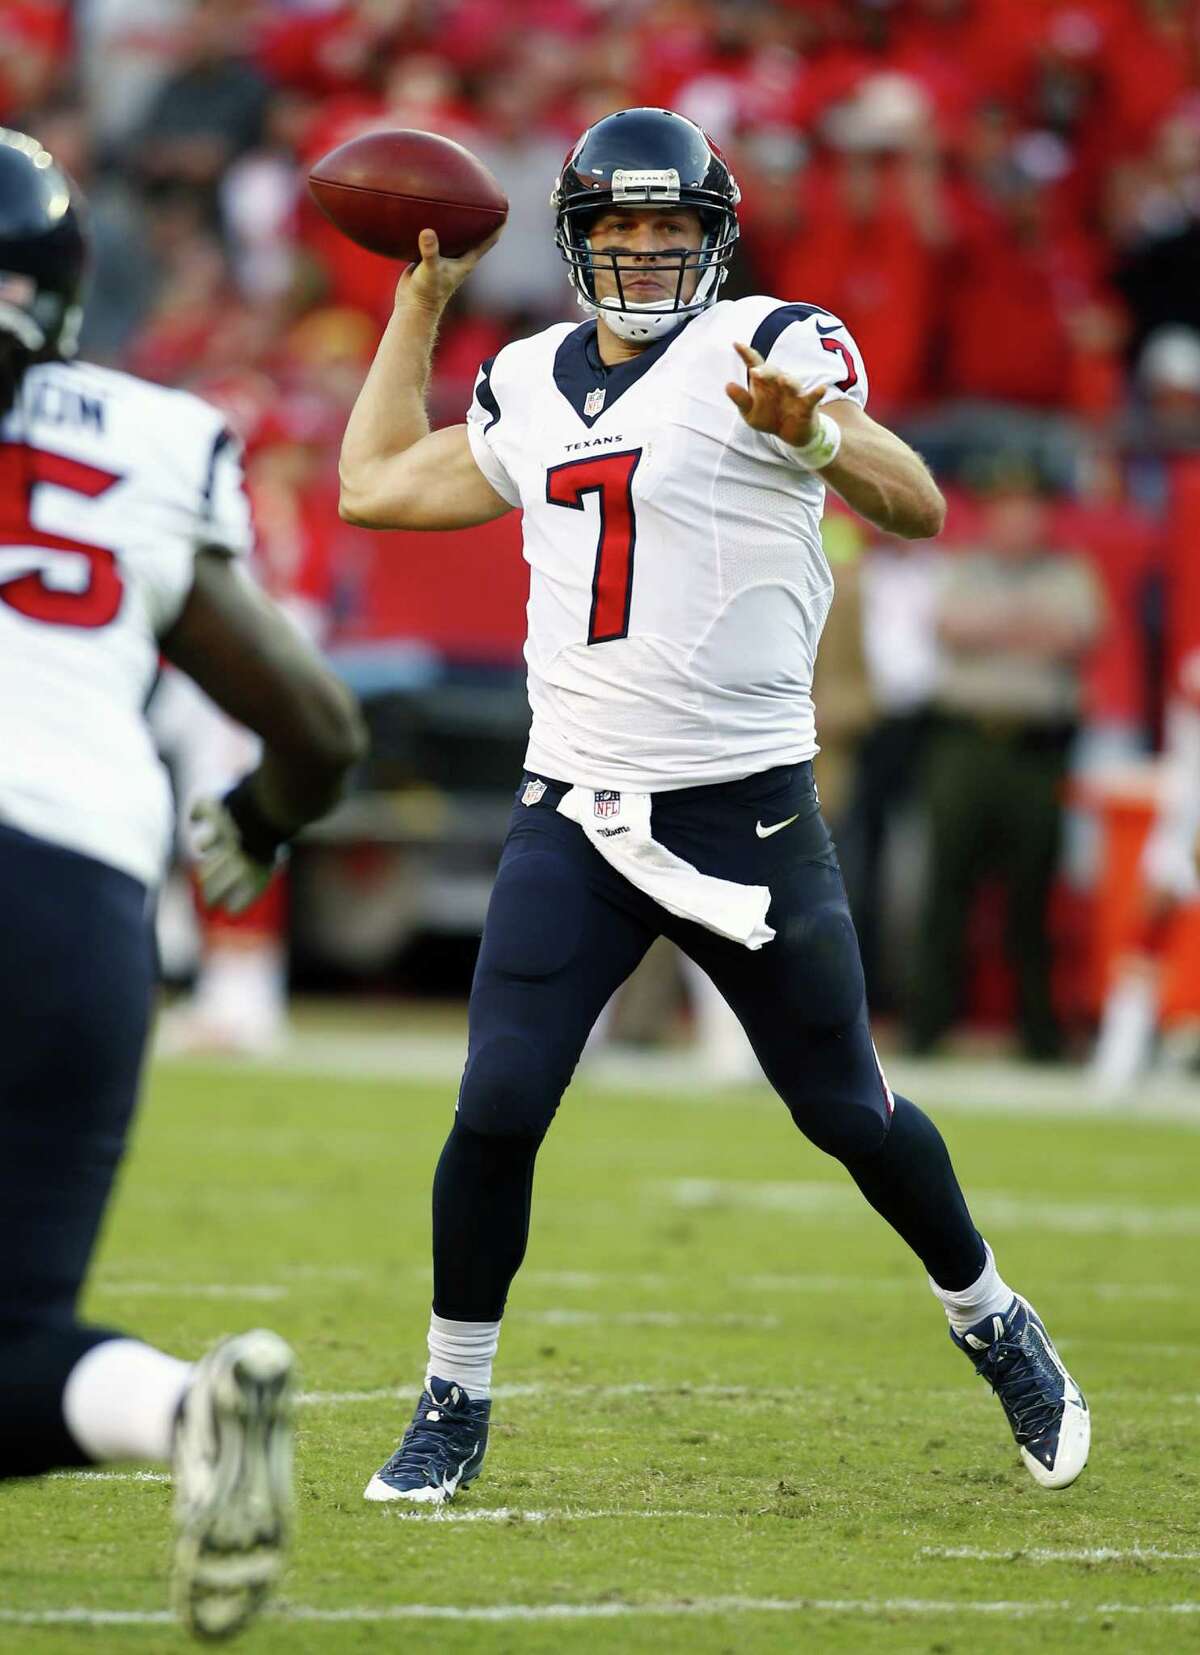 Case Keenum will make his second start when the Texans face Andrew Luck and the Colts on Sunday.